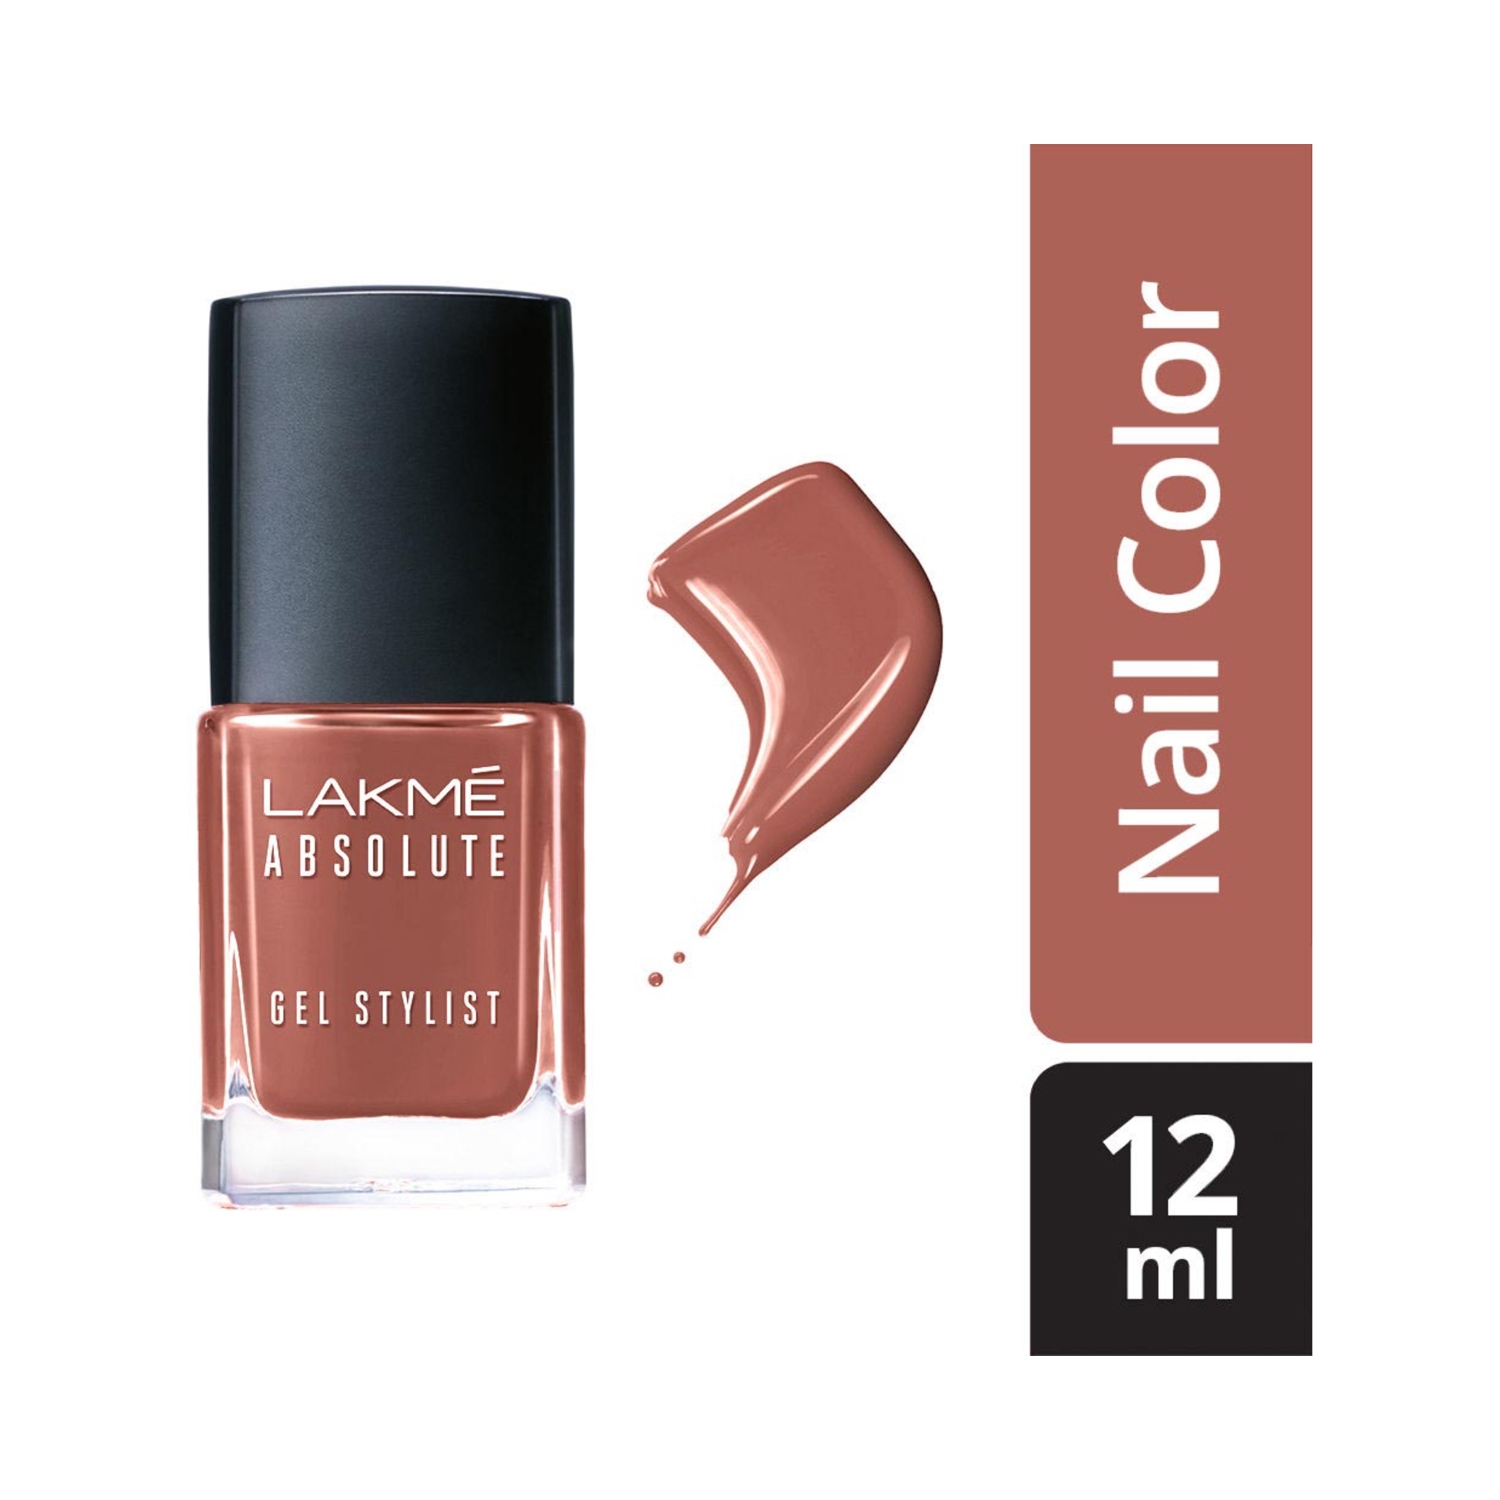 Lakme Absolute Gel Stylist Nail Paint Coral Rush Review, Photos & NOTD | My  Exquisite World